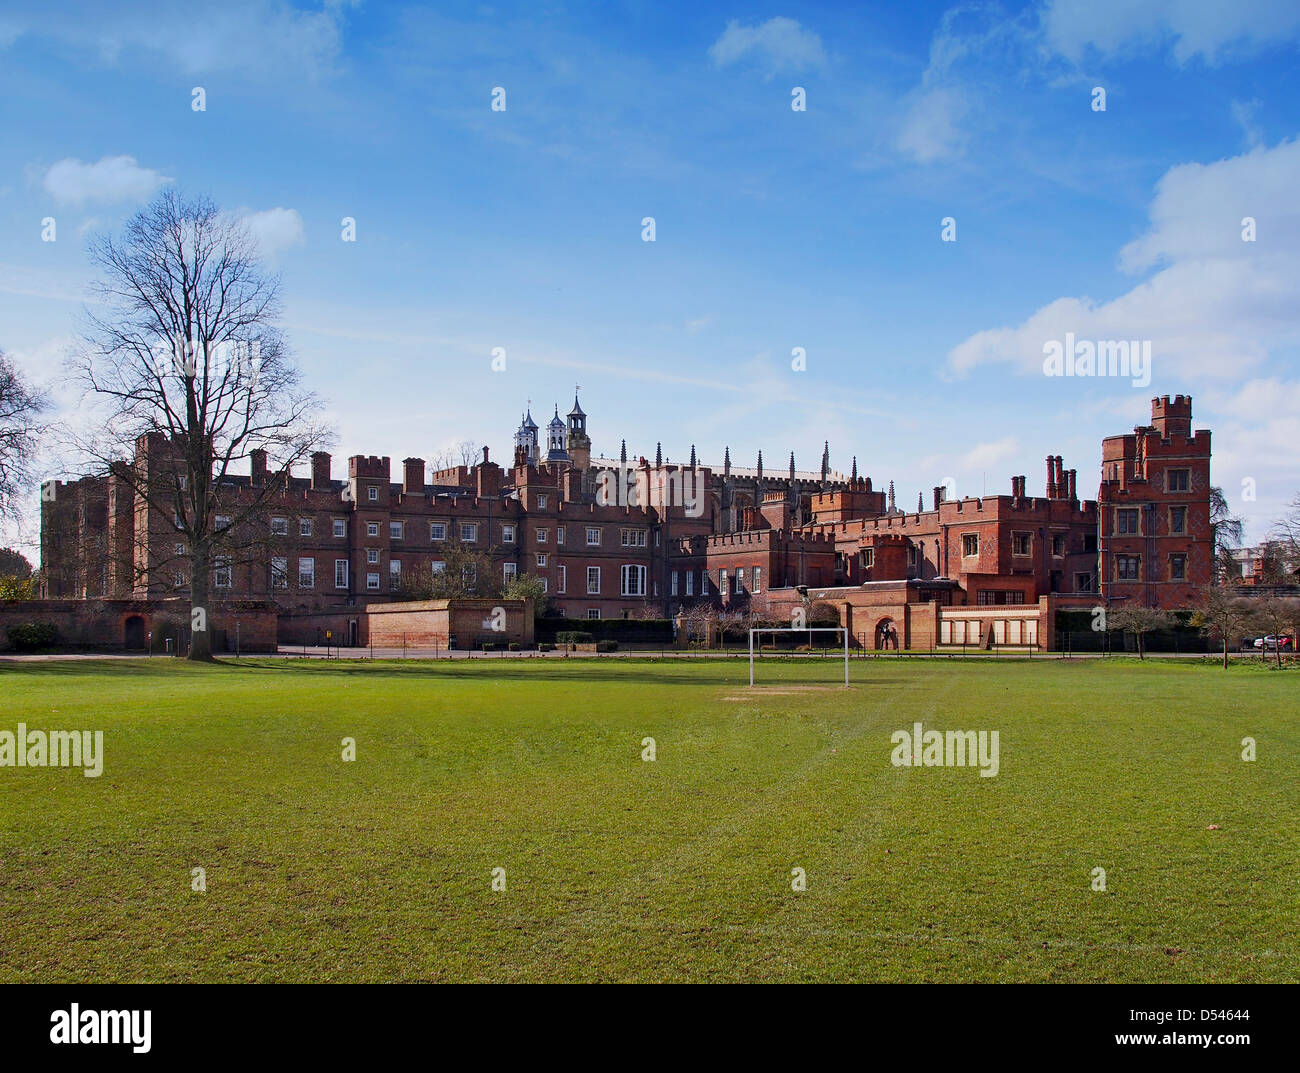 Historical buildings of Eton College viewed across playing fields Stock Photo